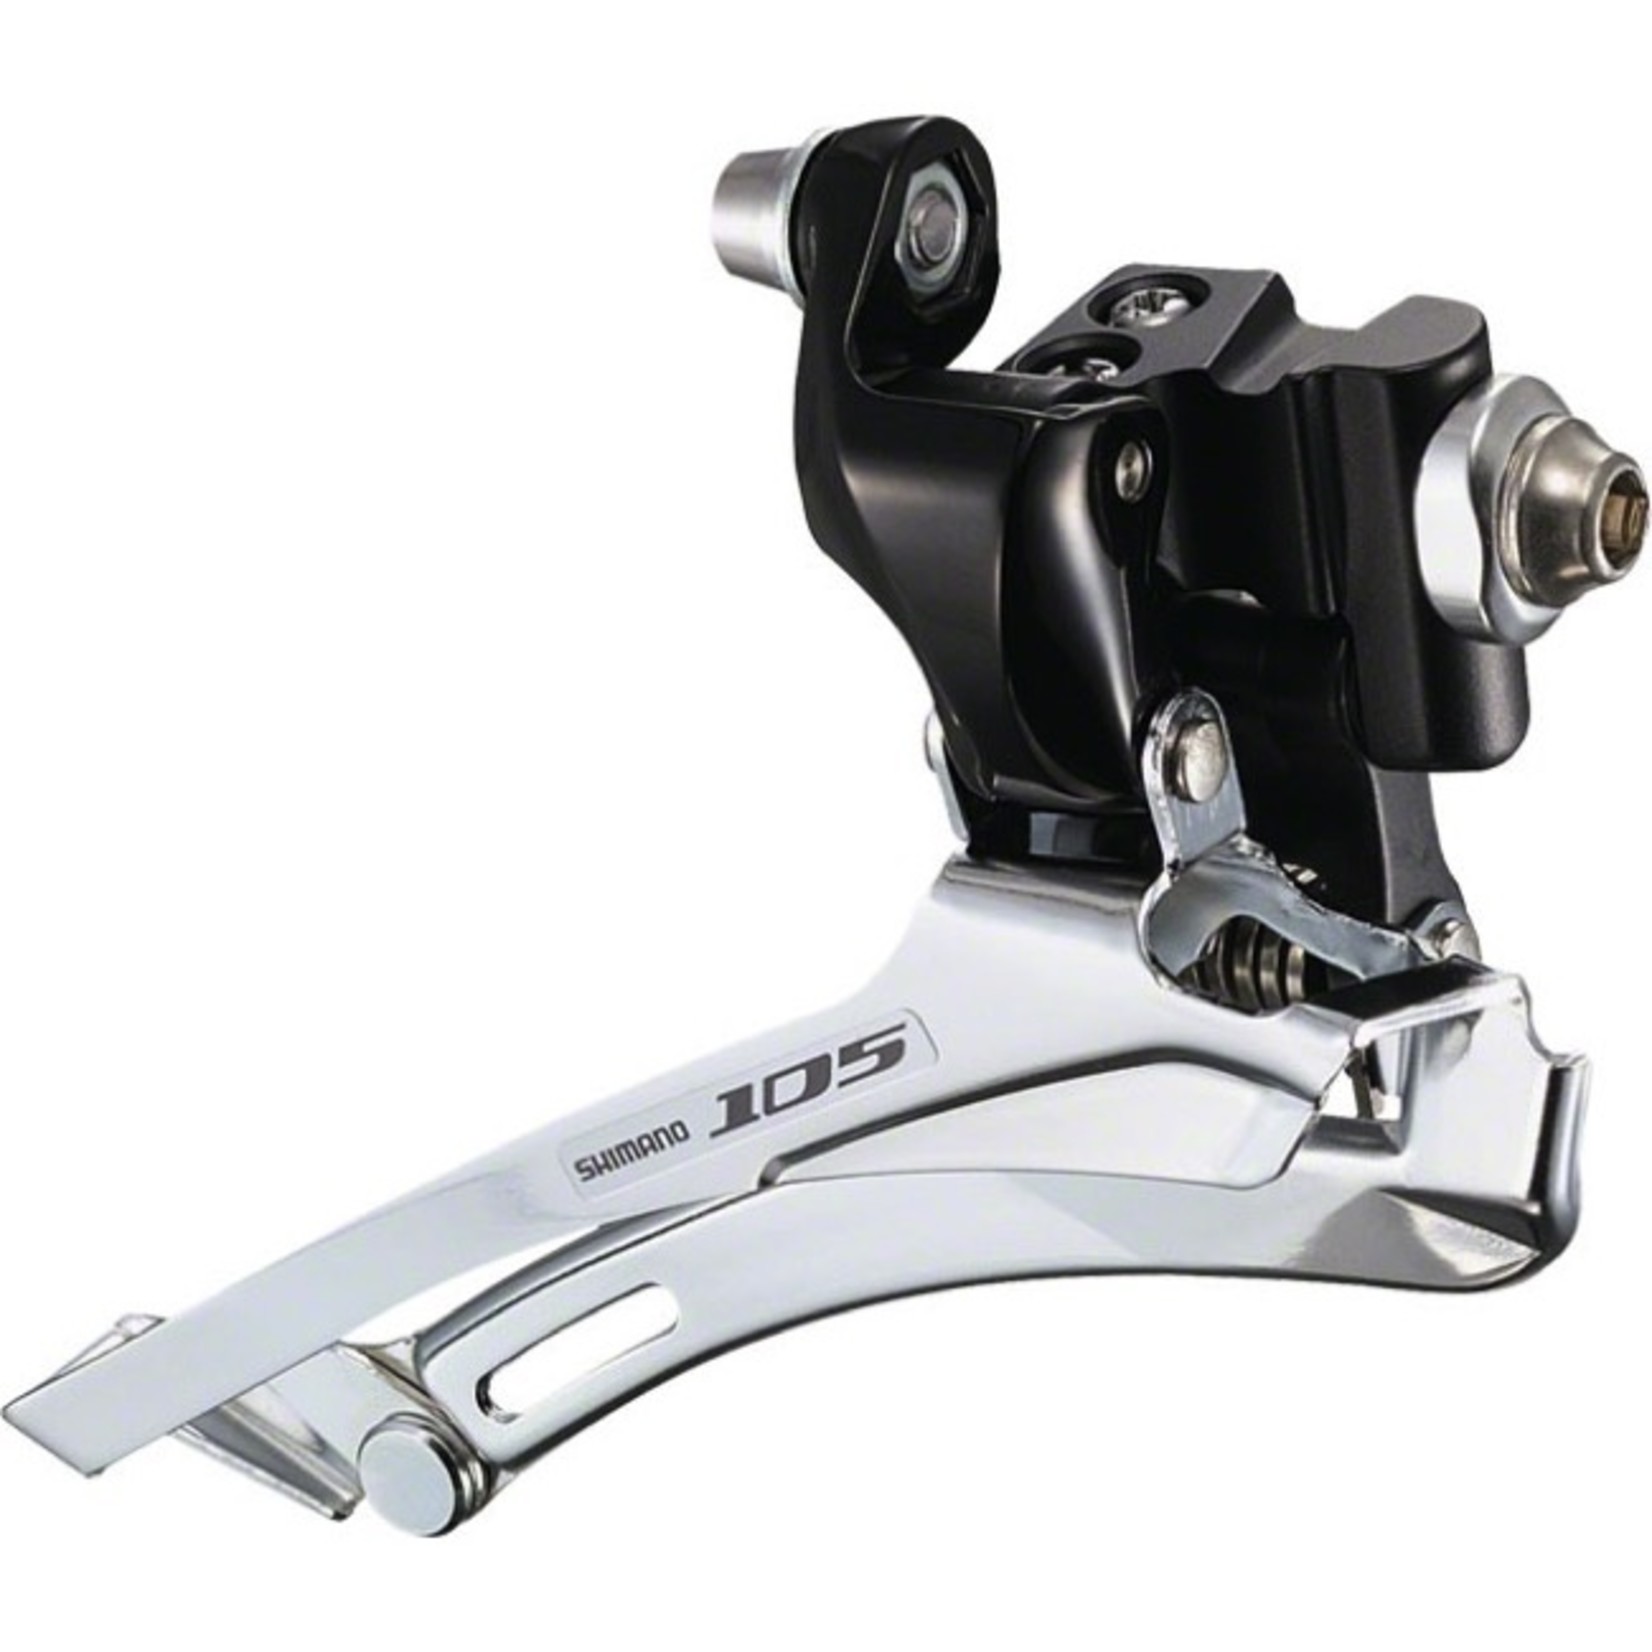 Shimano FRONT DERAILLEUR, FD-5700-L, 105, FOR FRONT DOUBLE & REAR 10-SPEED, BRAZE-ON